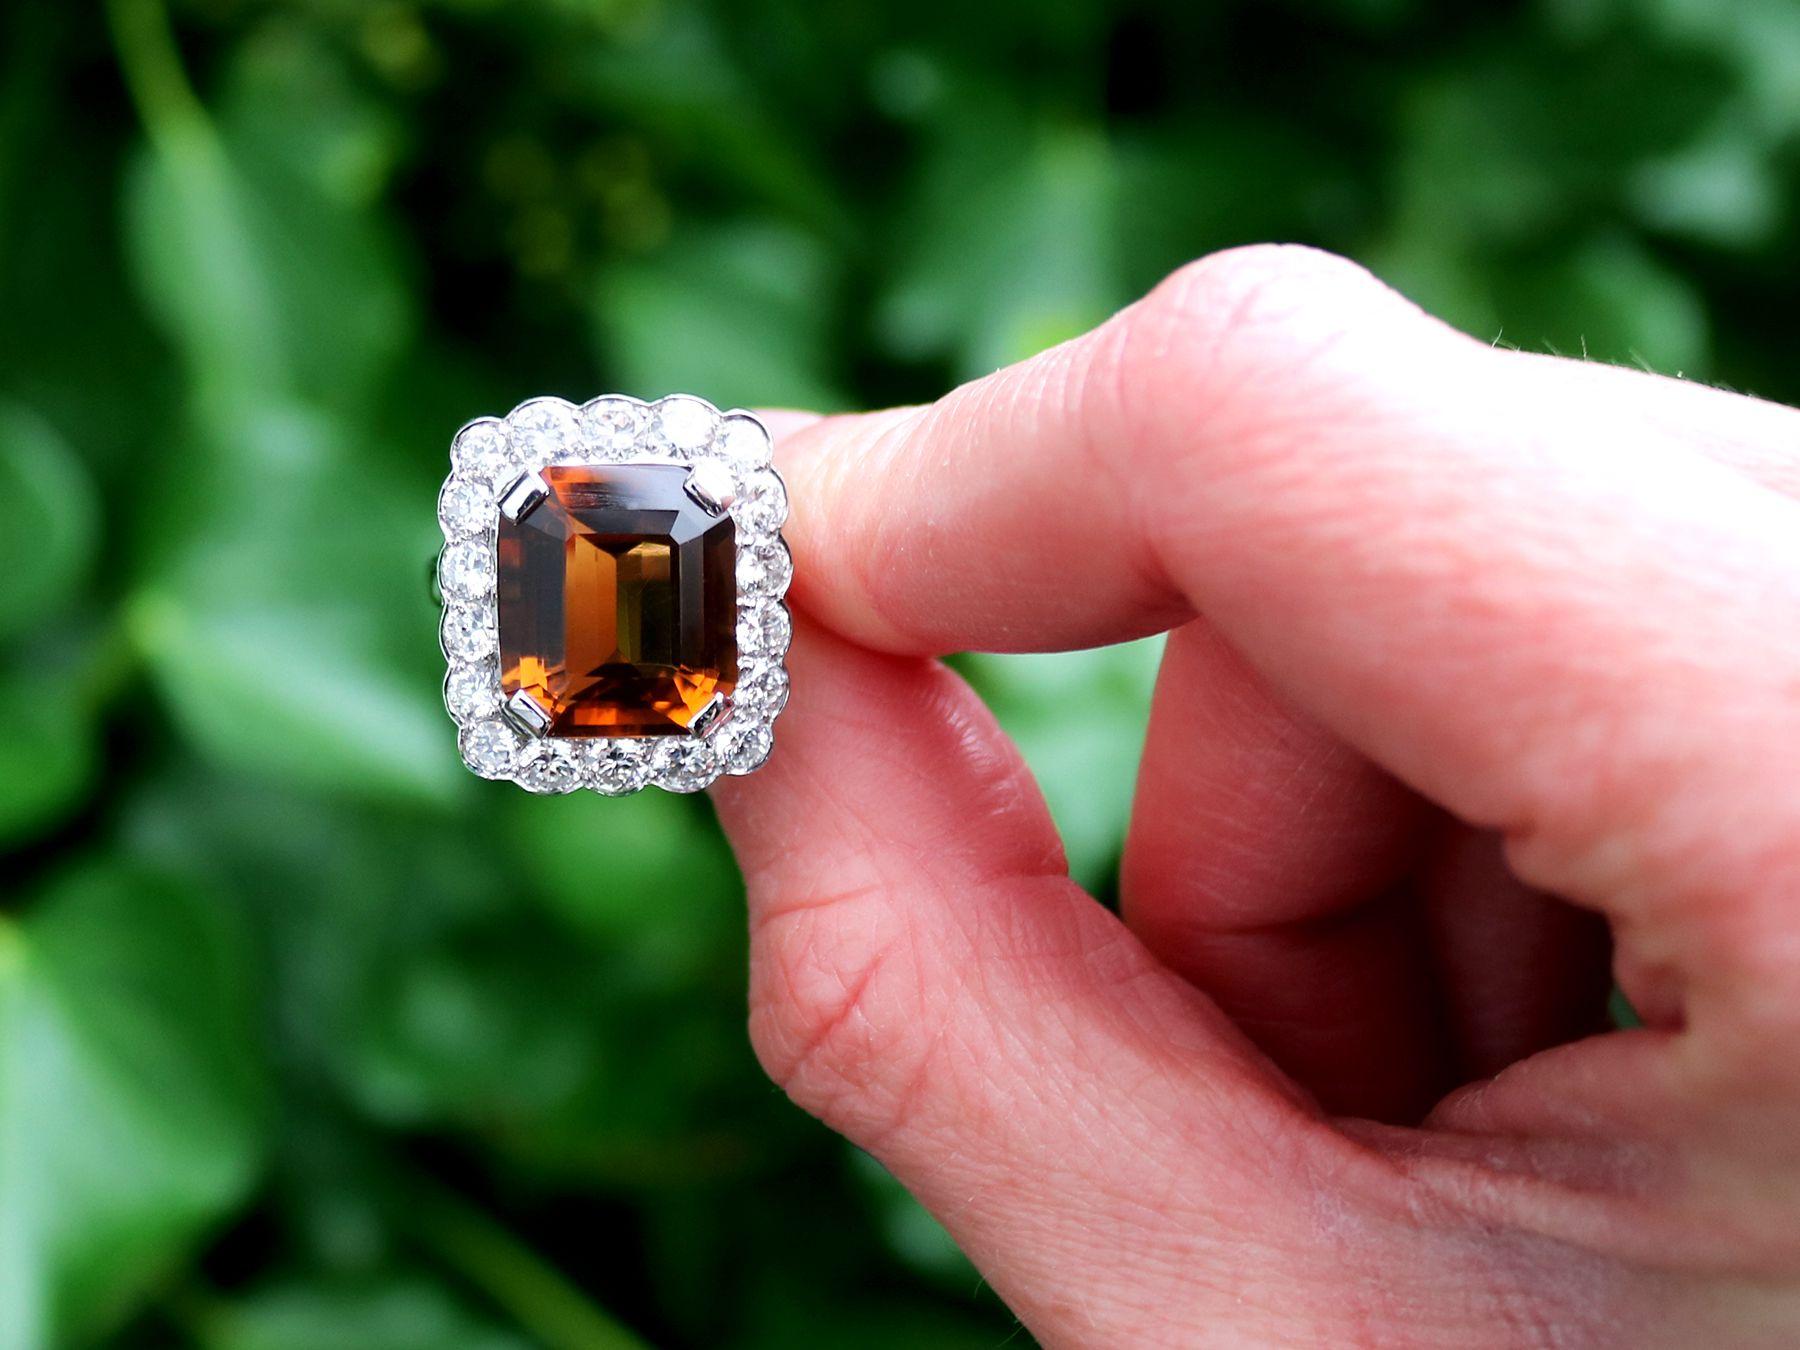 A stunning, fine and impressive 6.98 carat citrine and 2.54 carat diamond, platinum dress ring; part of our diverse vintage jewellery and estate jewelry collections.

This stunning, fine and impressive vintage gemstone ring has been crafted in